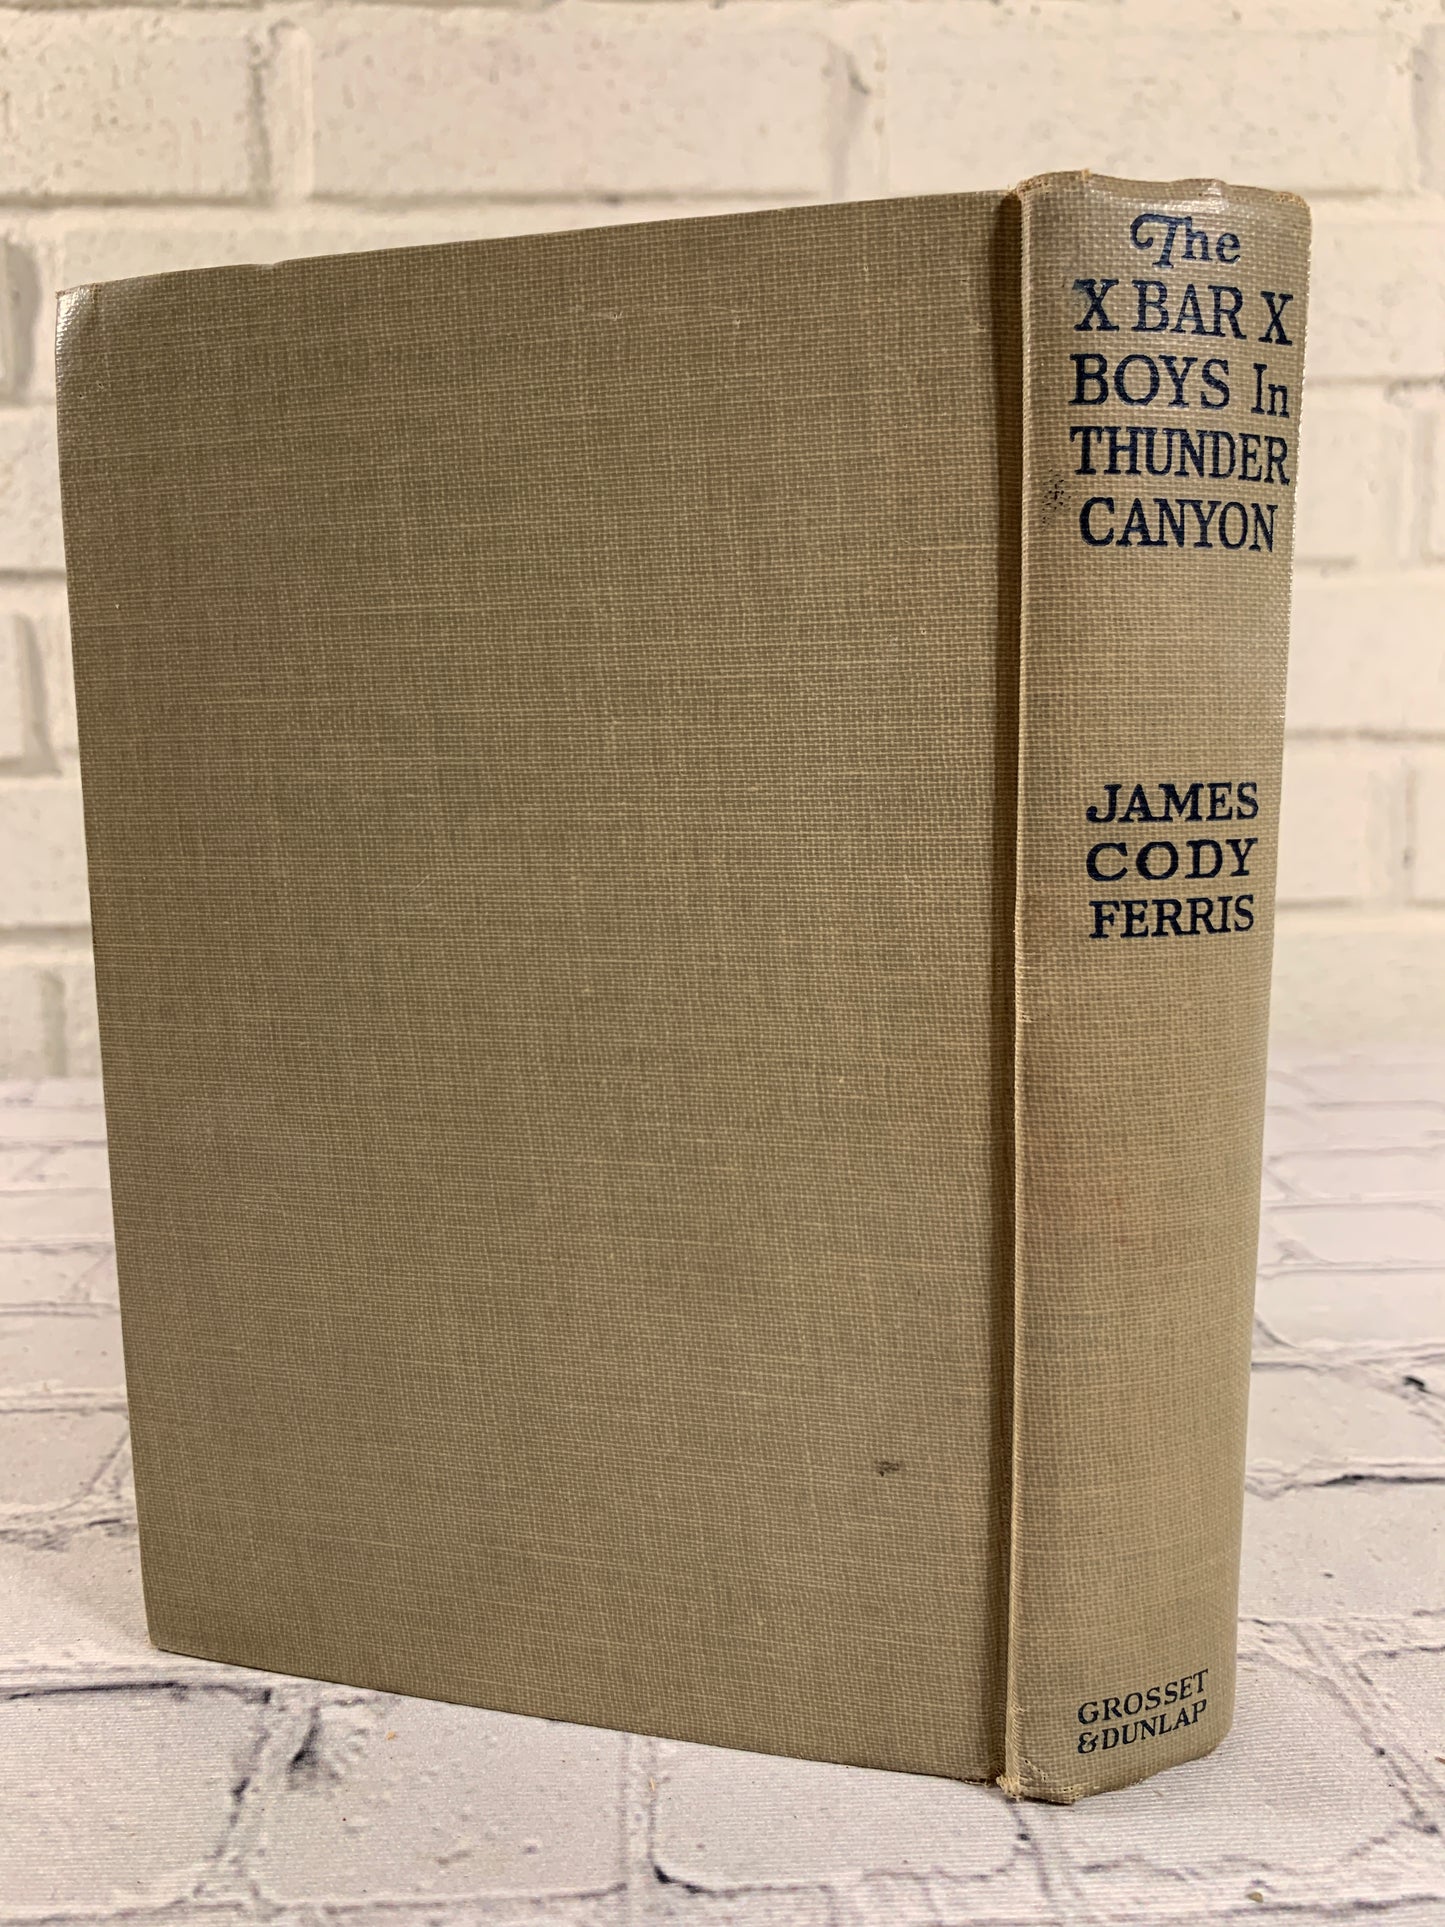 The X Bar X Boys in the Thunder Canyon by James Codey Ferris [1926]